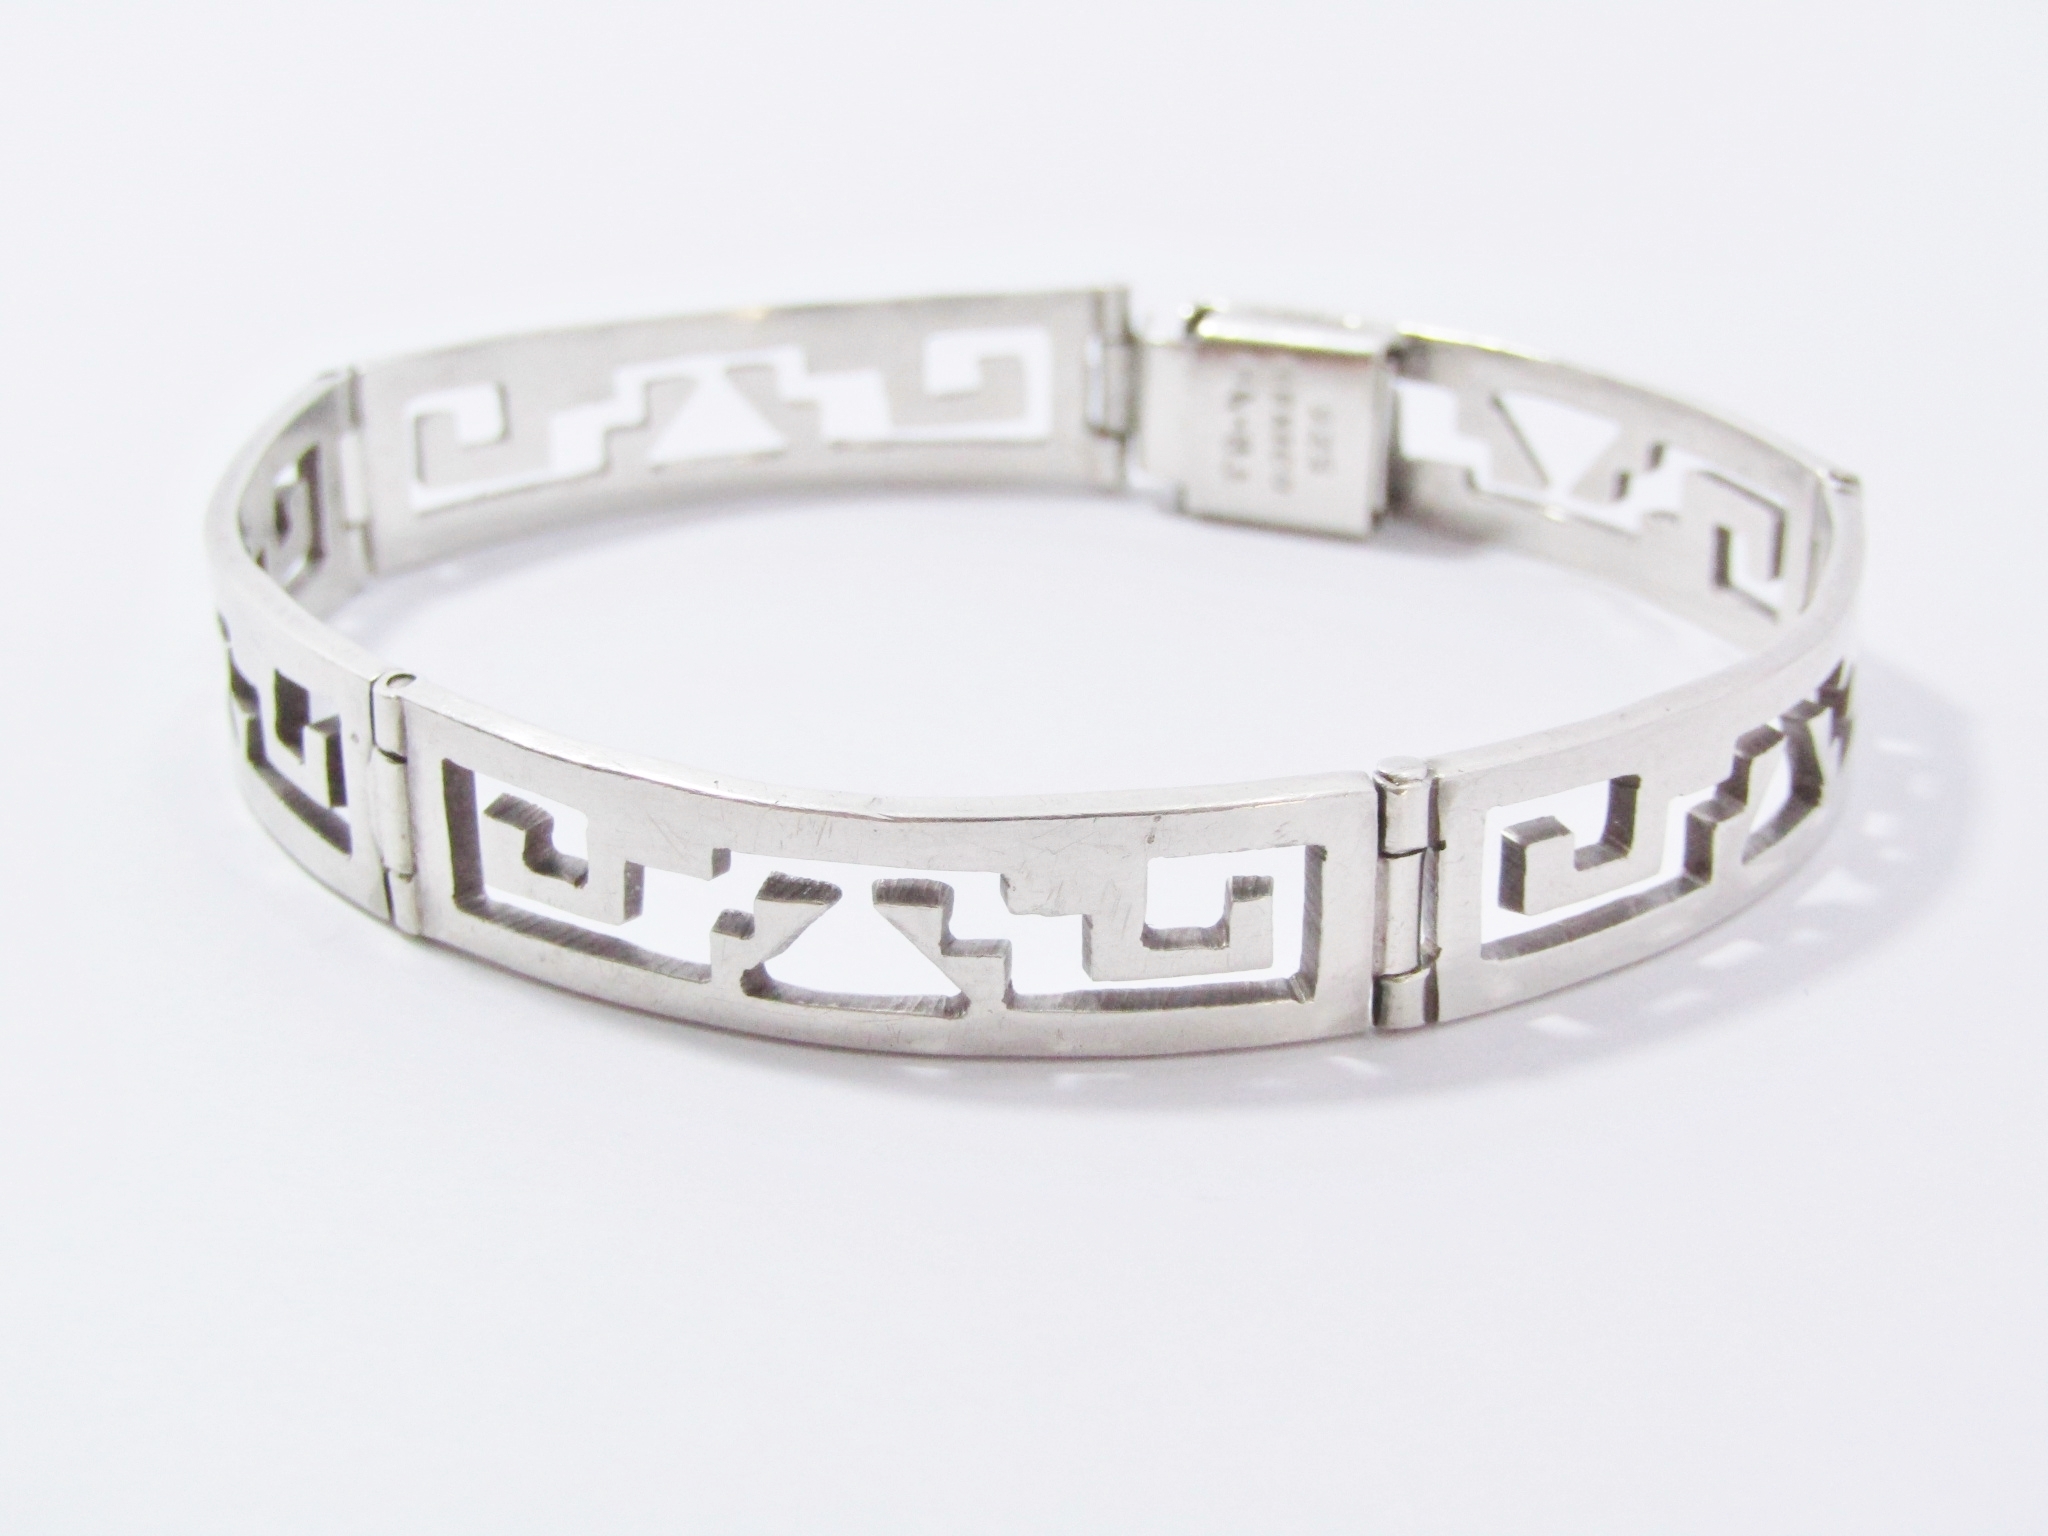 A Gorgeous Taxco Mexico Bracelet in Sterling Silver.